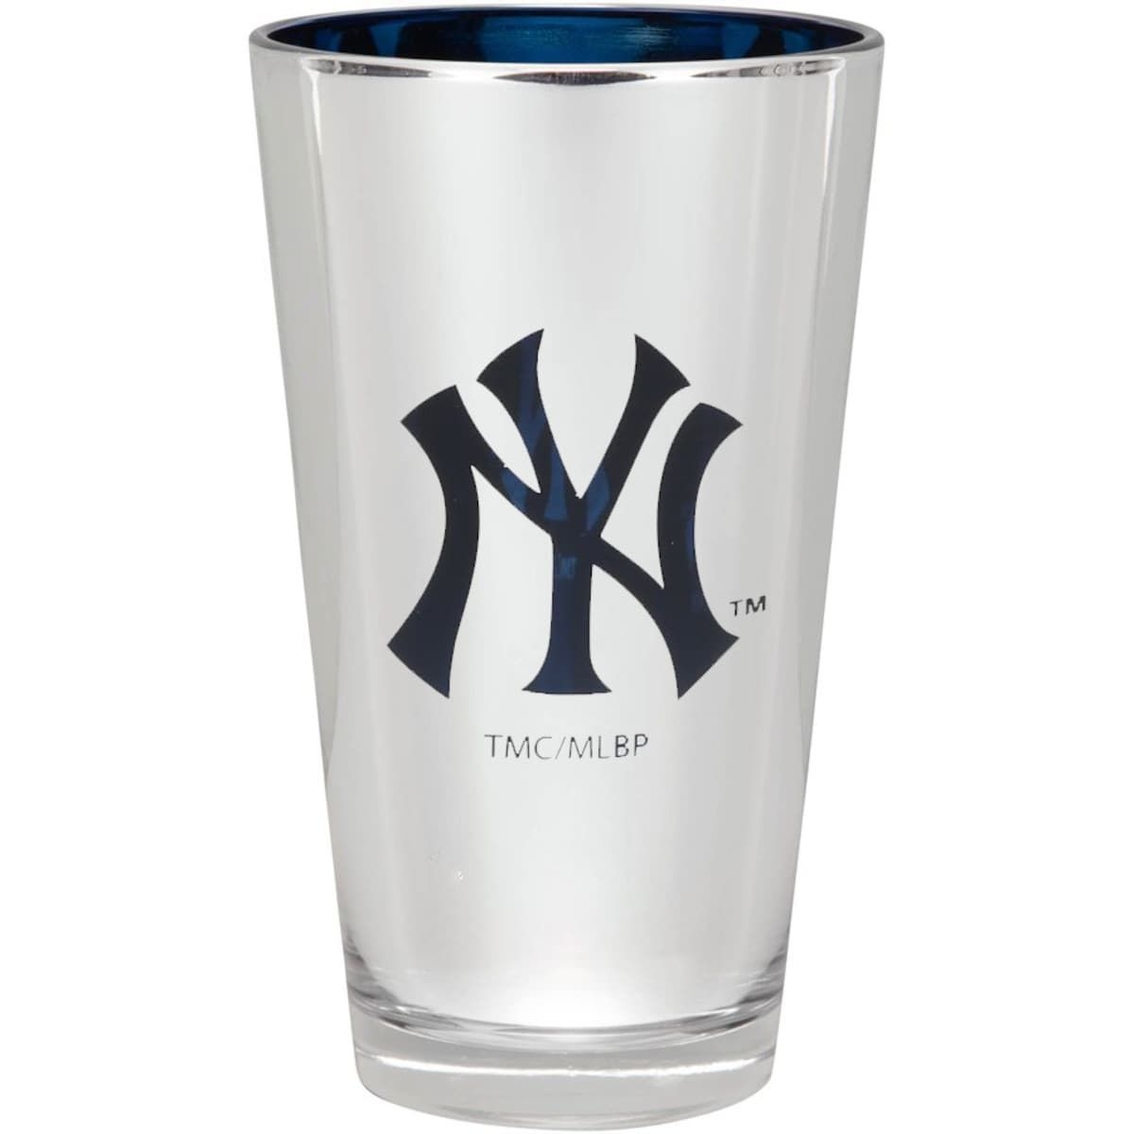 New York Yankees 16oz. Electroplated Pint Glass - Image 1 of 2